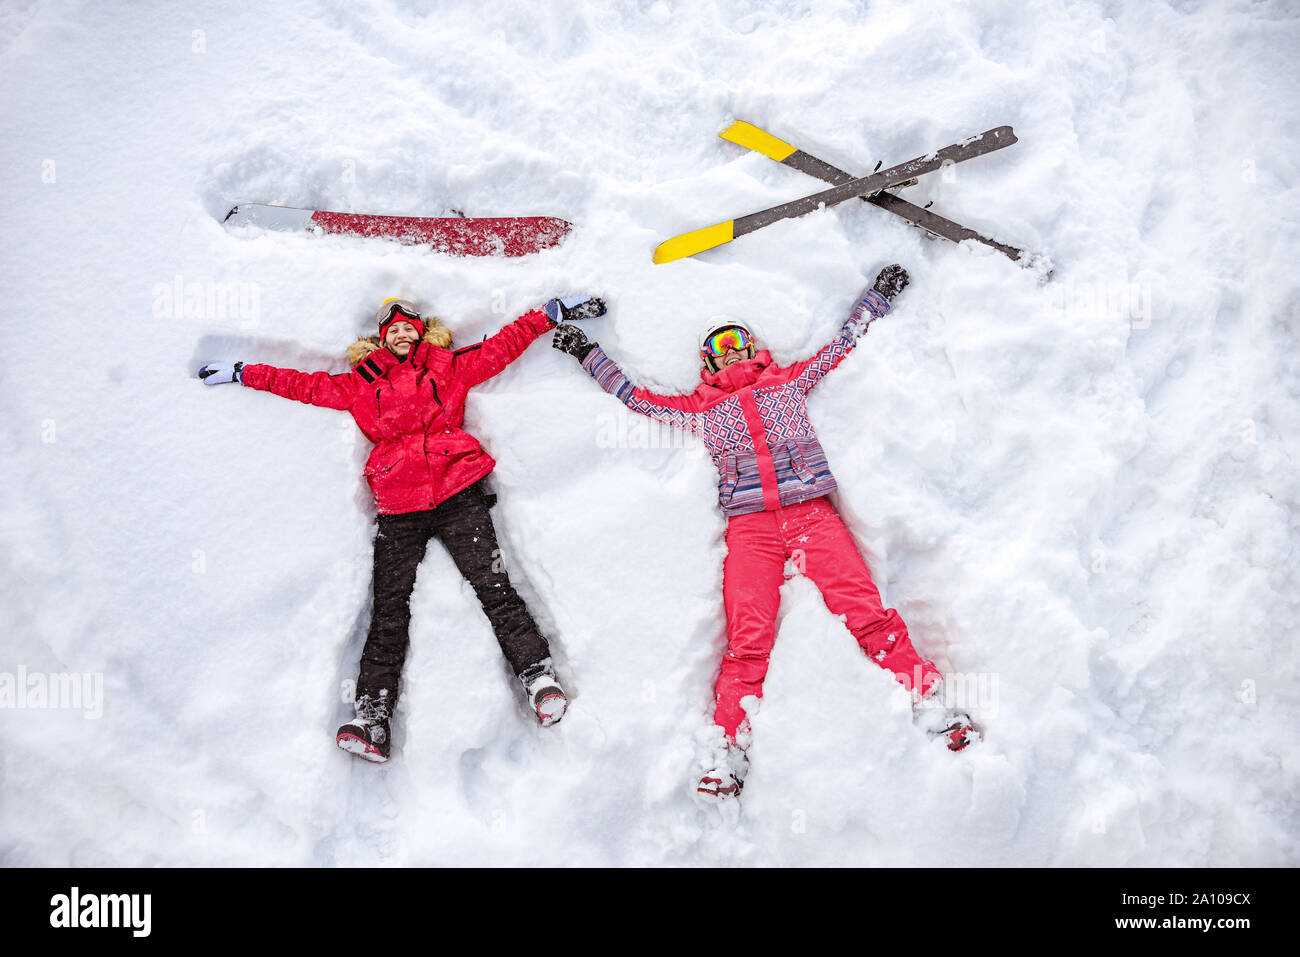 Skier and snowboarder are lying on snow with ski and snowboard and having fun. Aerial photo Stock Photo